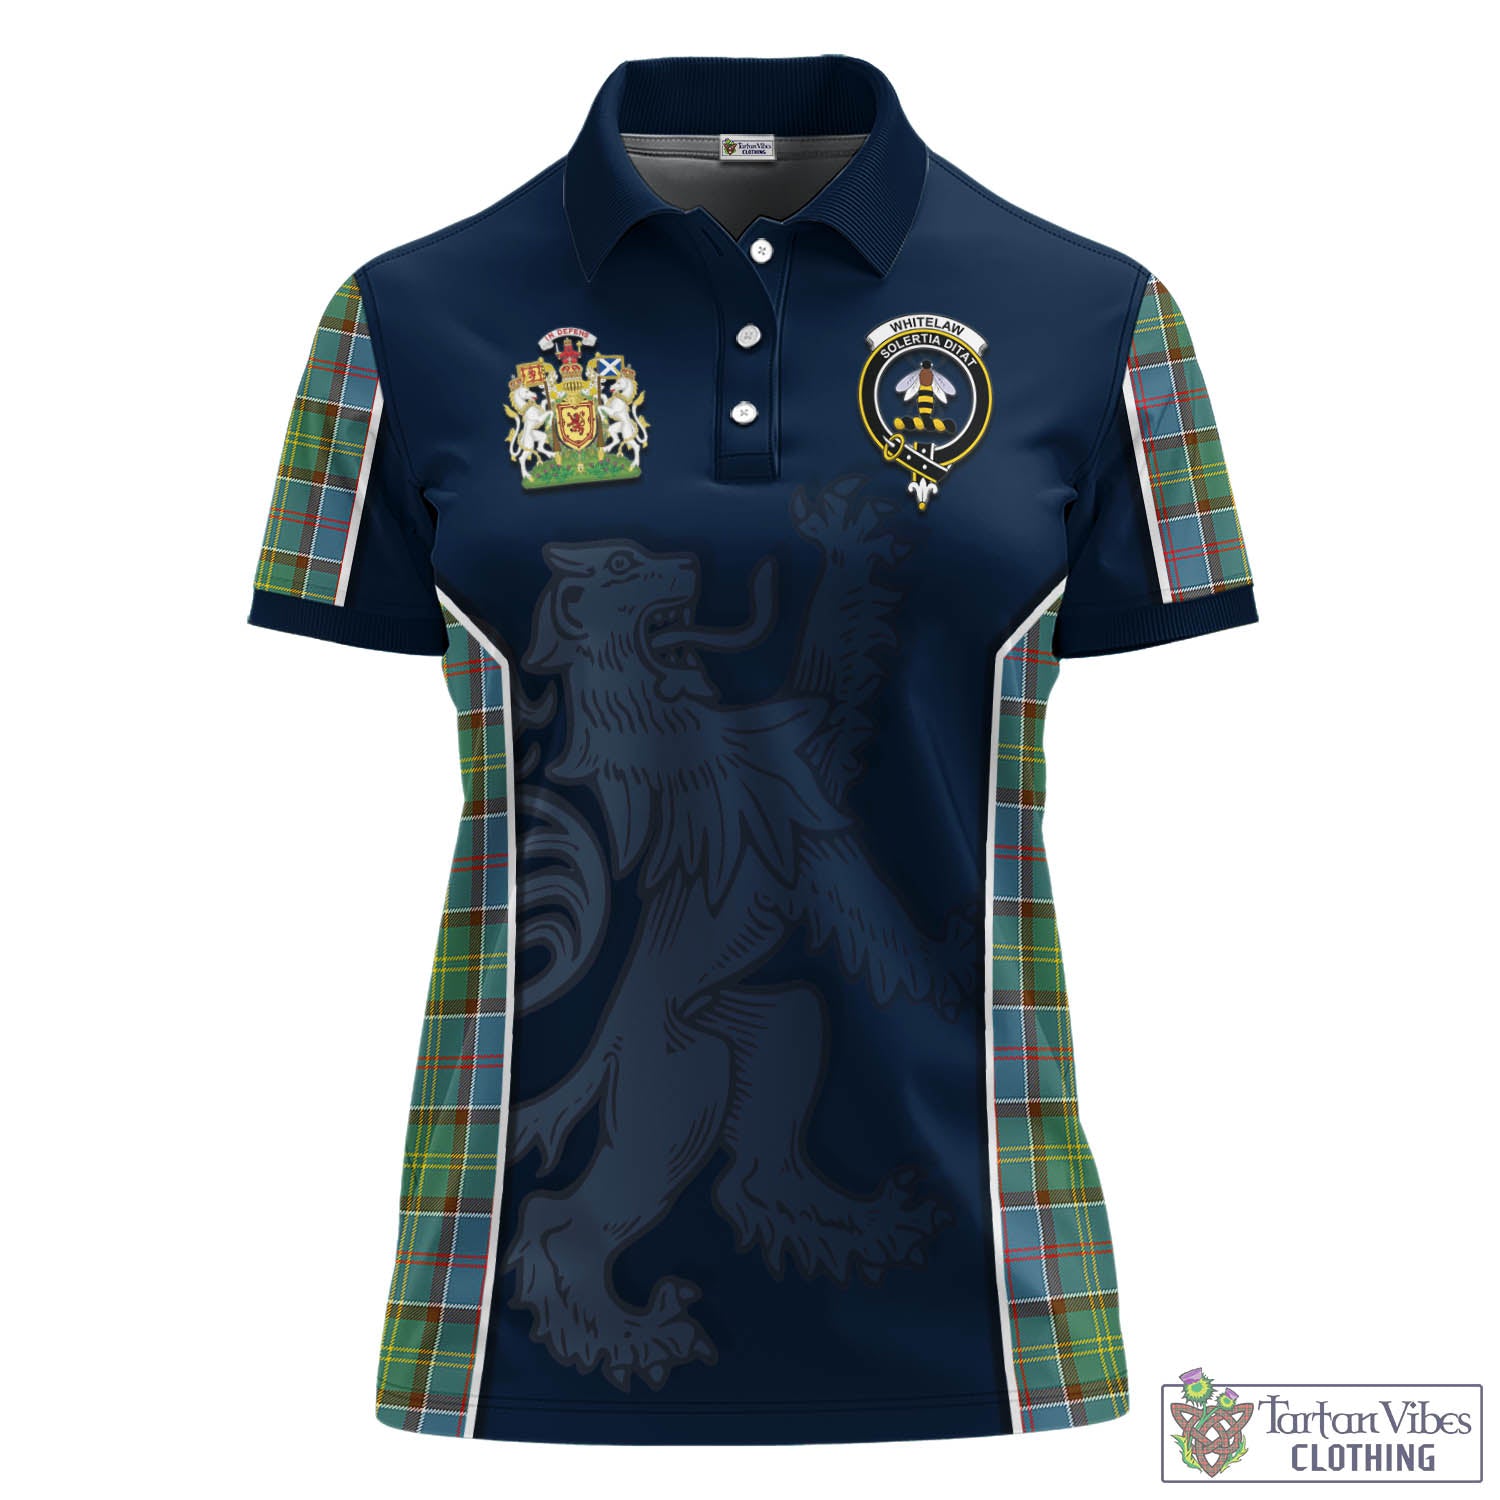 Tartan Vibes Clothing Whitelaw Tartan Women's Polo Shirt with Family Crest and Lion Rampant Vibes Sport Style